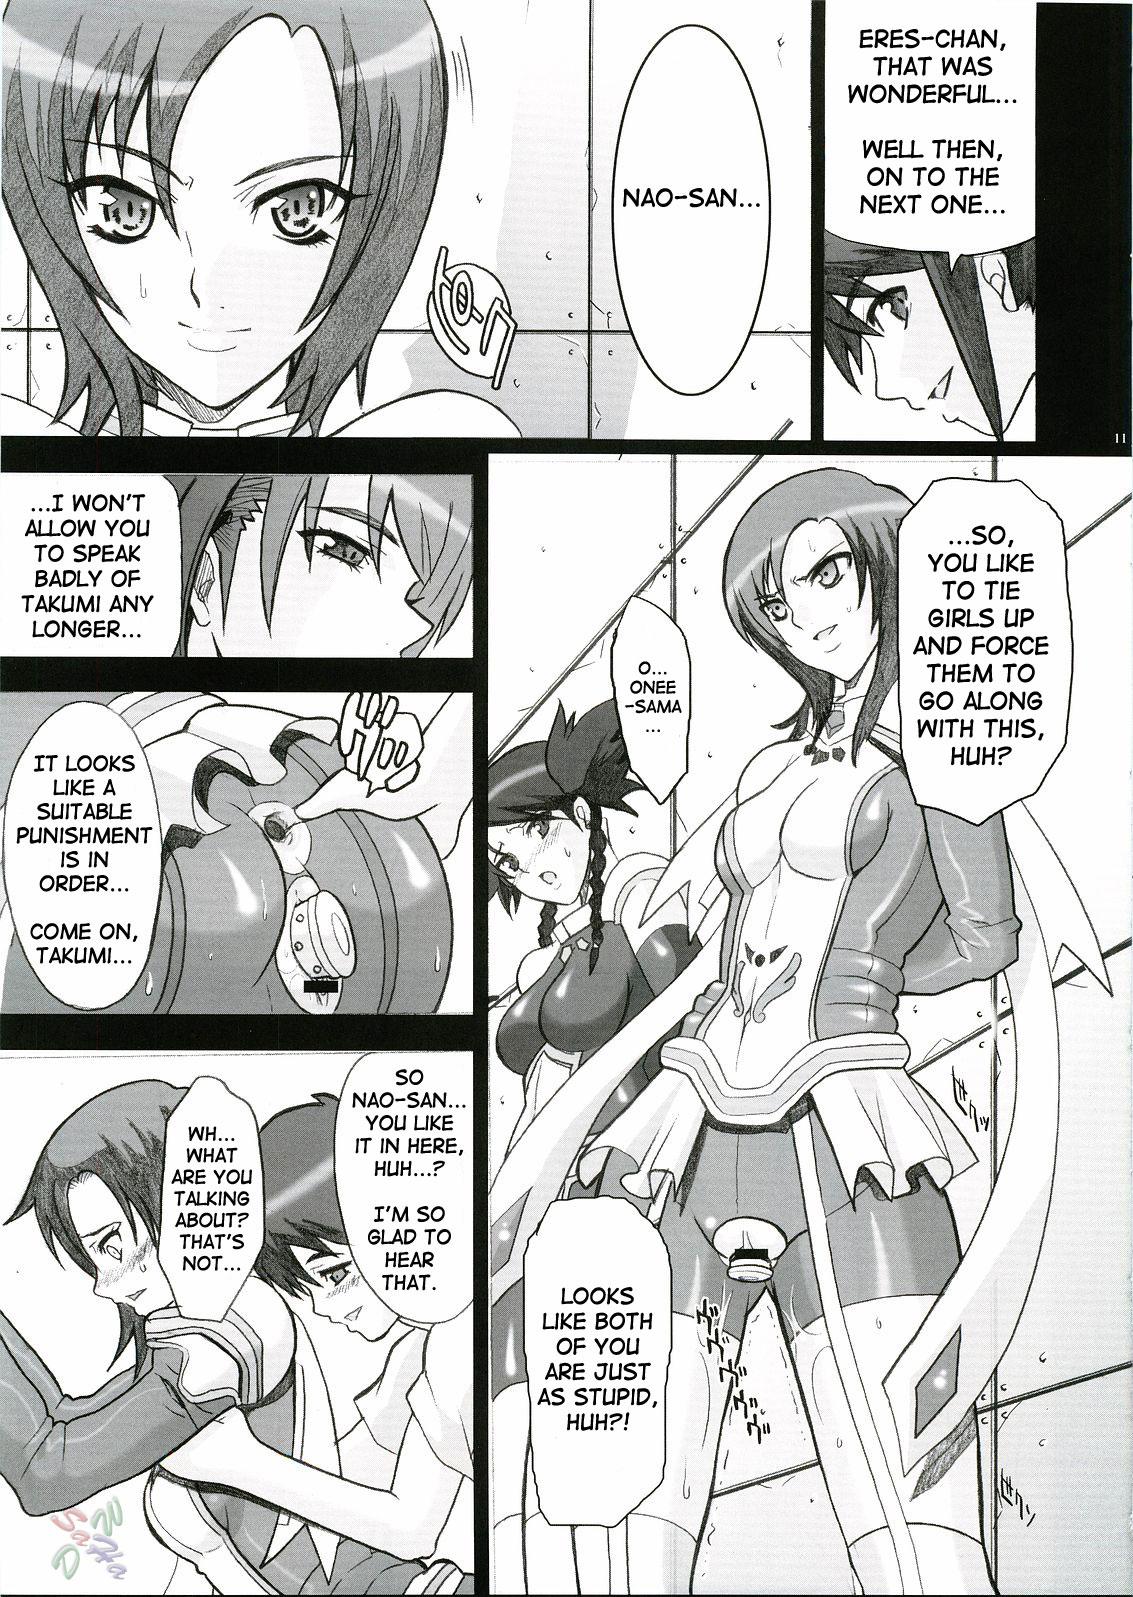 American IMPERIAL DAYS - Mai-otome Brother - Page 8